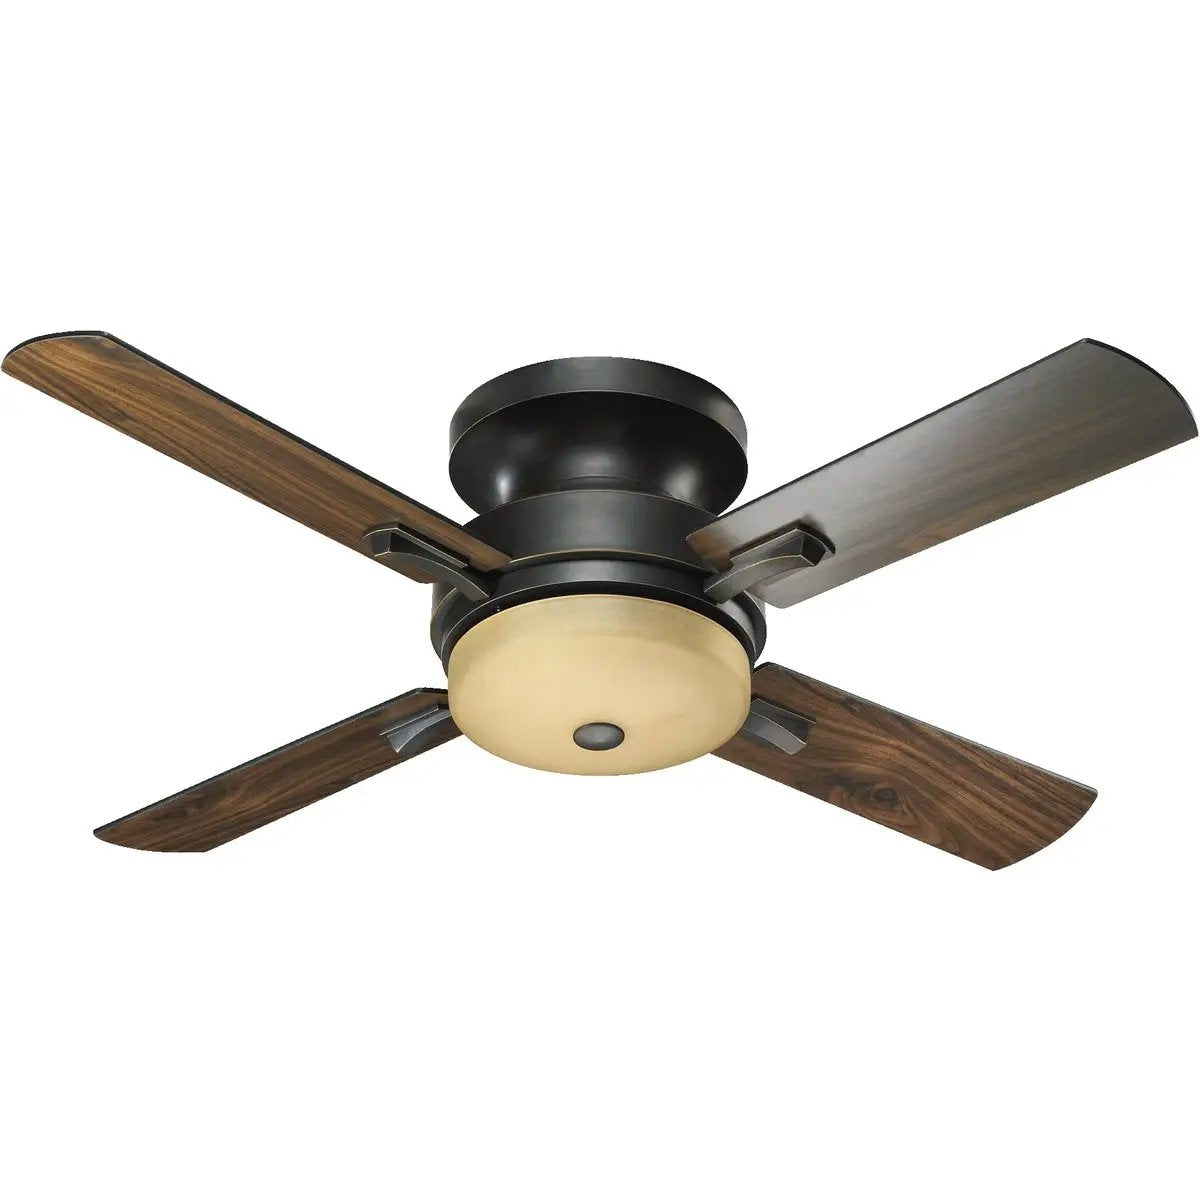 A Quorum International Flush Mount Ceiling Fan with Light, featuring slightly curved blades and inconspicuous housing. Effortlessly provides cooling comfort with a 52" sweep, perfect for areas with less overhead clearance. Includes 3 LED lamps and a light kit with a maximum wattage of 13.5 Watts. UL Listed for dry locations. Limited Lifetime warranty.